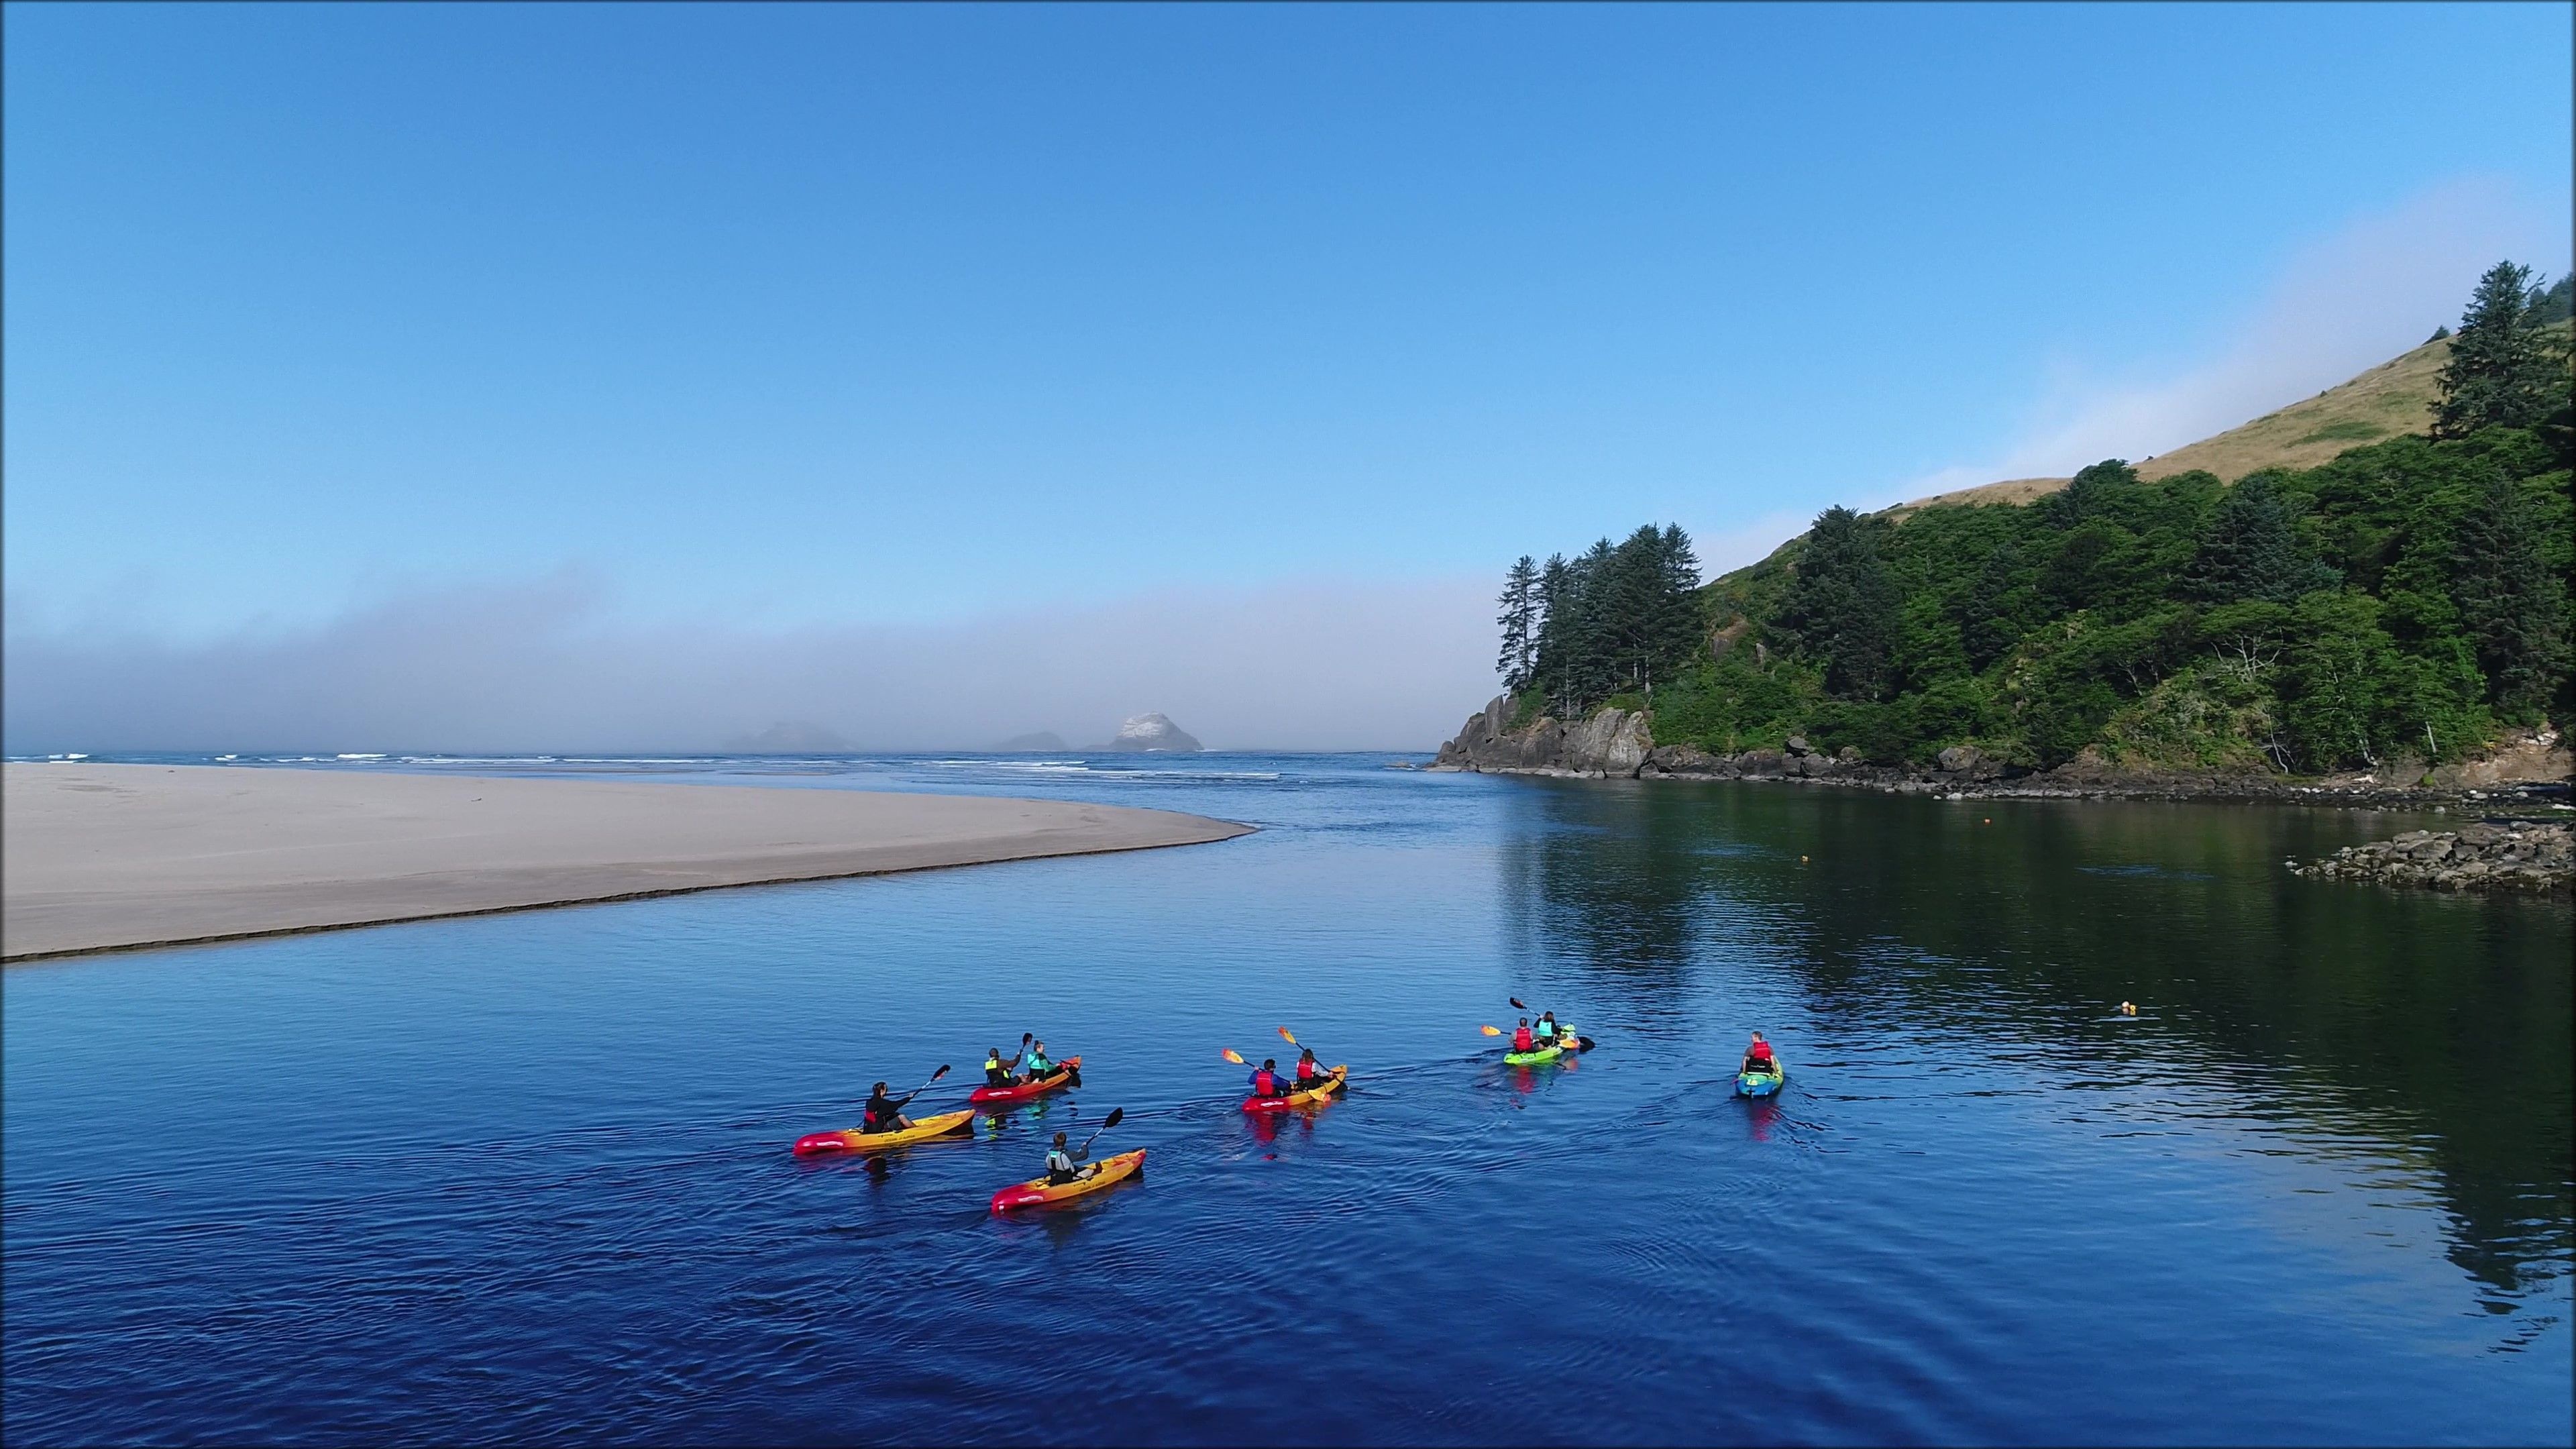 Kayaking: Expedition canoeing in Oregon State, Recreational activity and active sport. 3840x2160 4K Wallpaper.